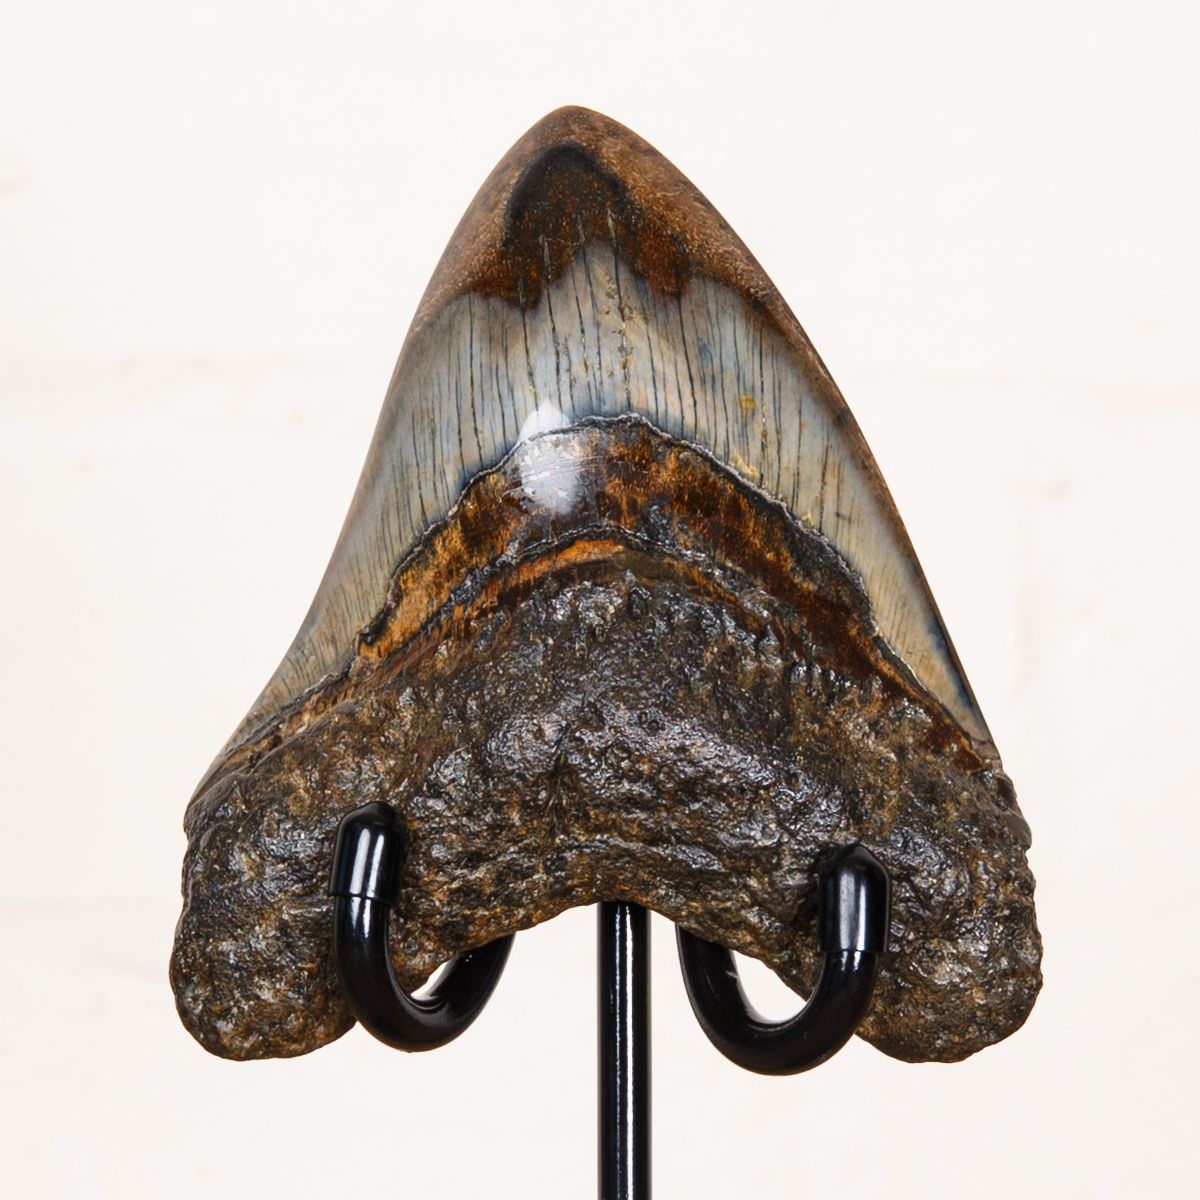 Collector Grade 4.2 Inch Polished Megalodon Shark Tooth Fossil on Stand (Carcharodon megalodon)